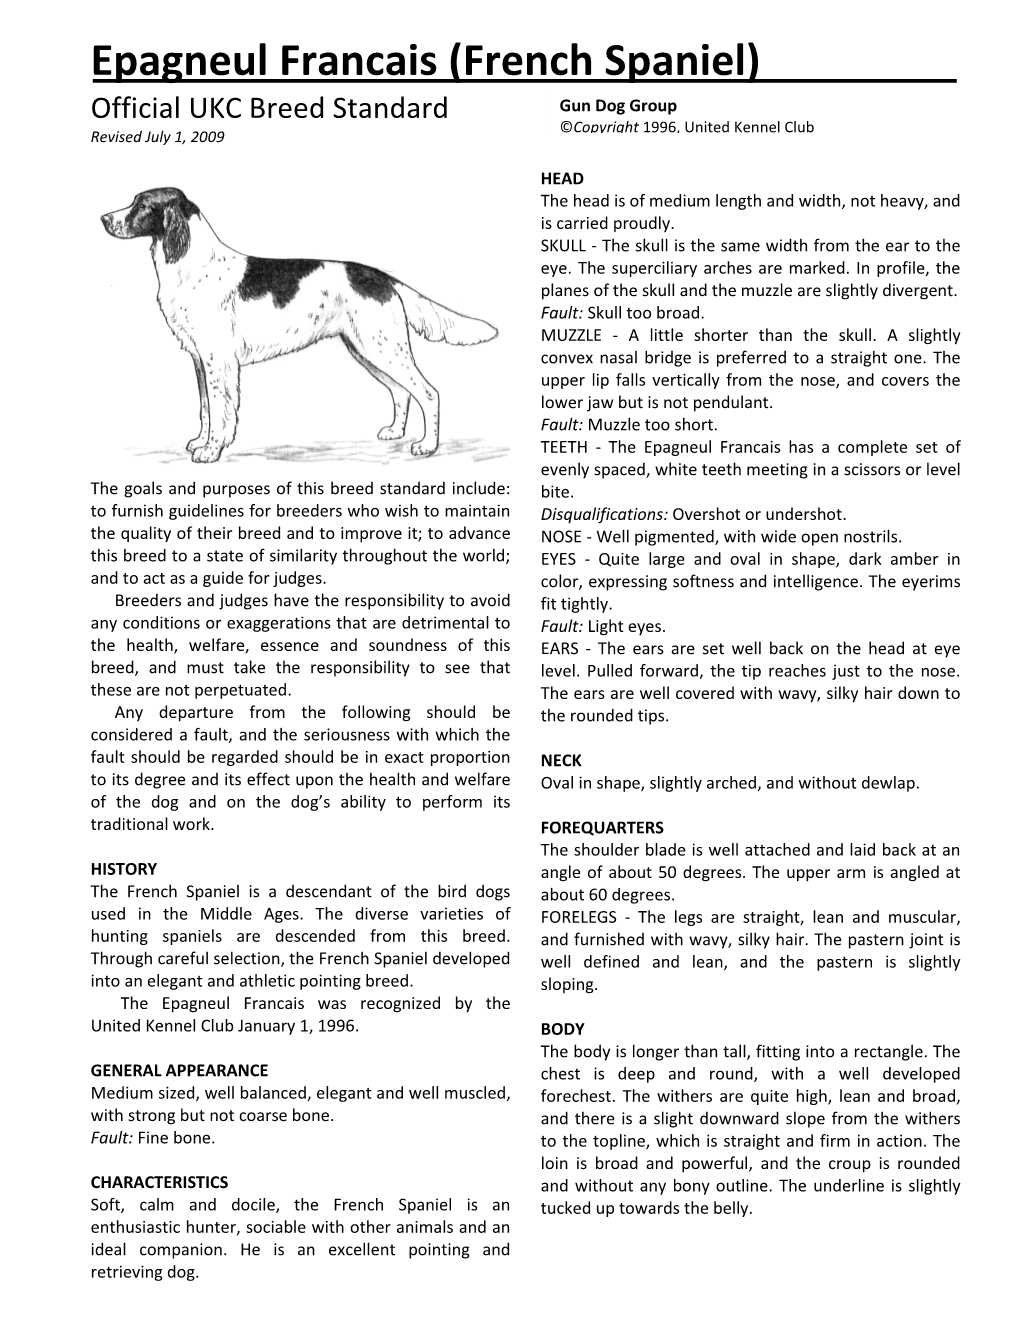 Epagneul Francais (French Spaniel) Official UKC Breed Standard Gun Dog Group ©Copyright 1996, United Kennel Club Revised July 1, 2009